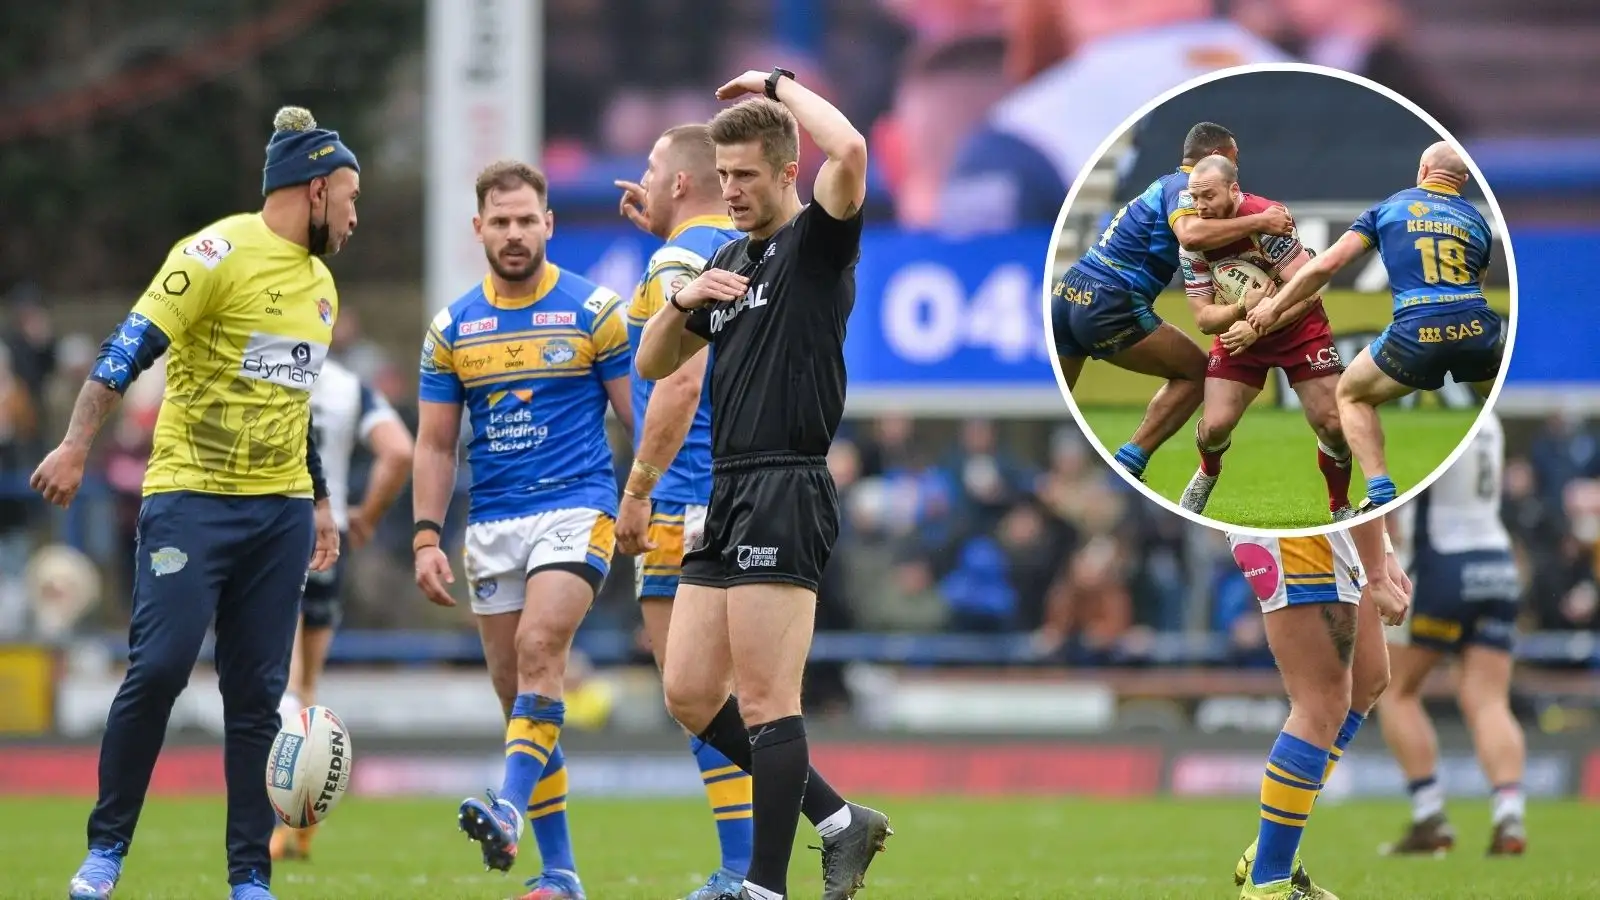 RFL confirm plans for major law changes including controversial lowering of legal tackle height